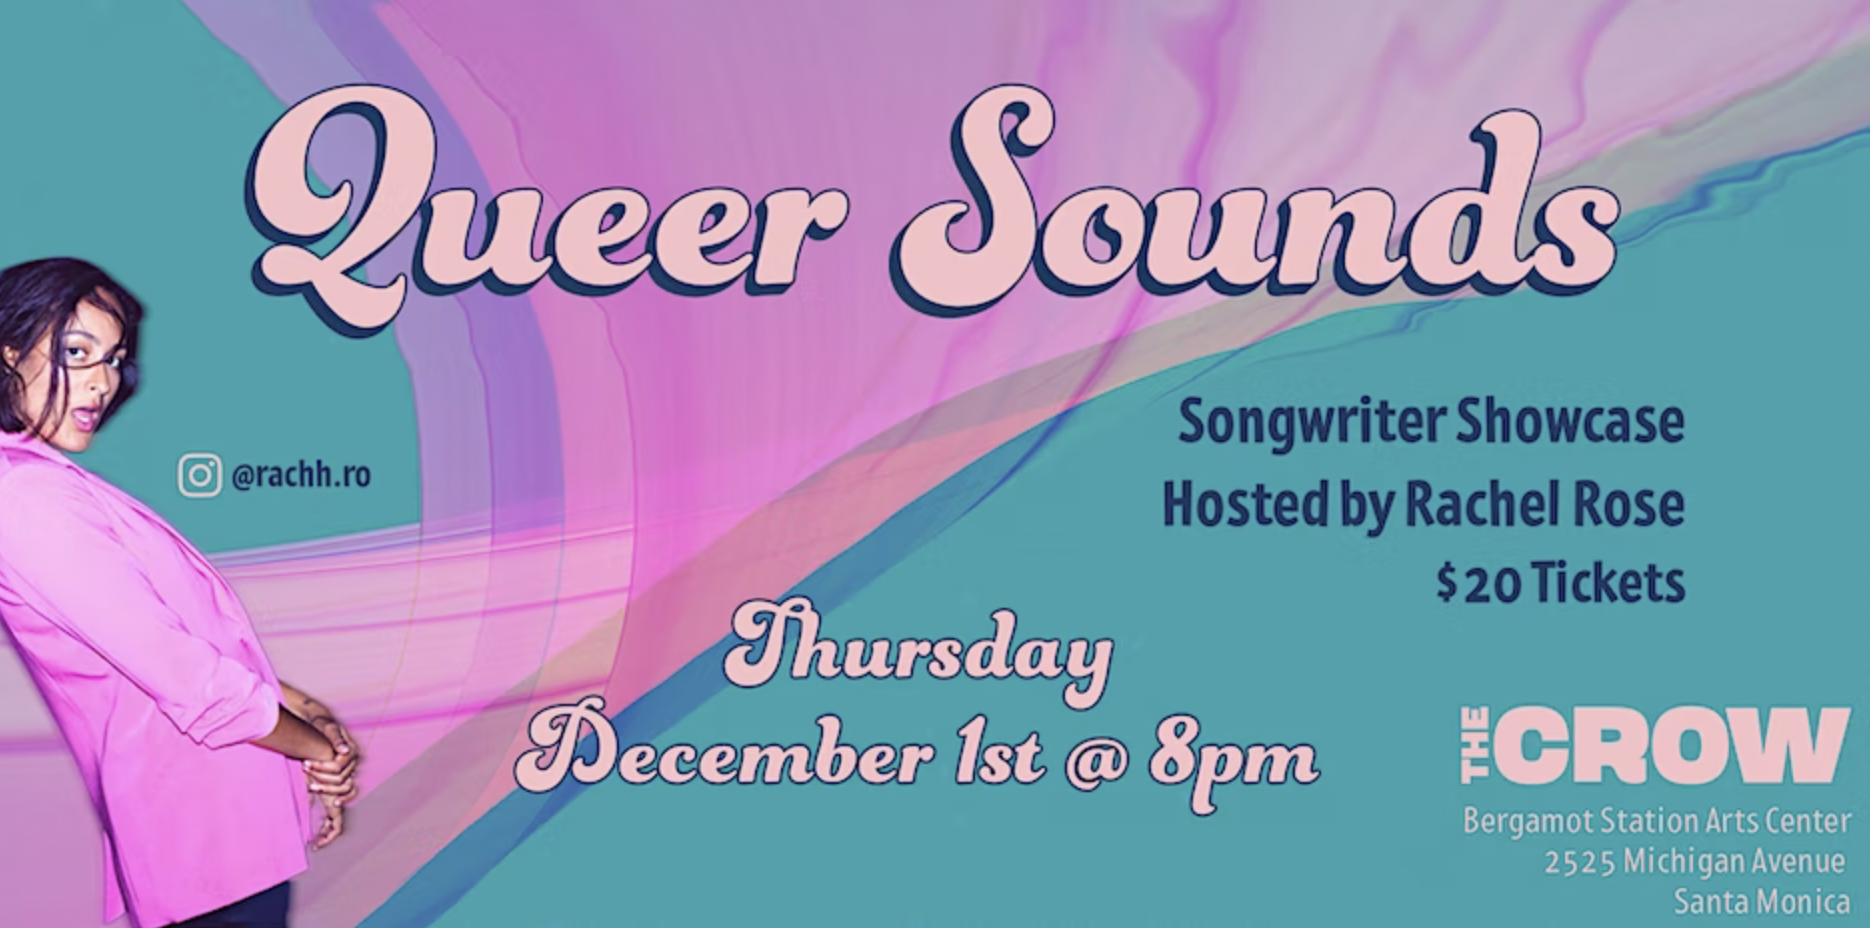 Queer Sounds at The Crow